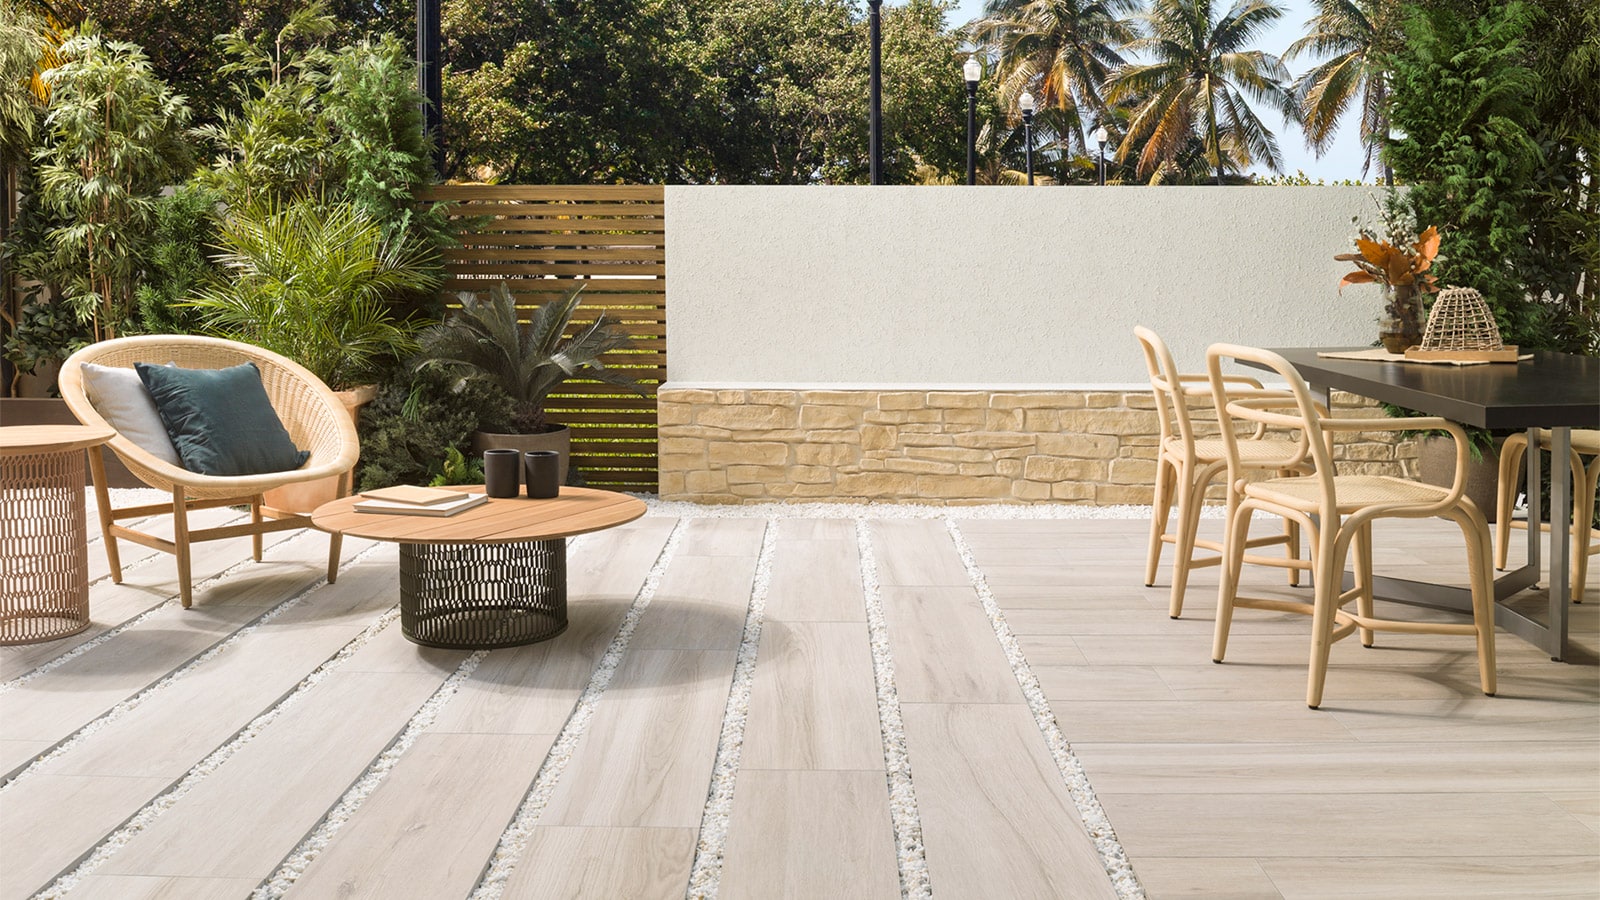 Elegant and natural exteriors with 20 mm porcelain stoneware by Butech